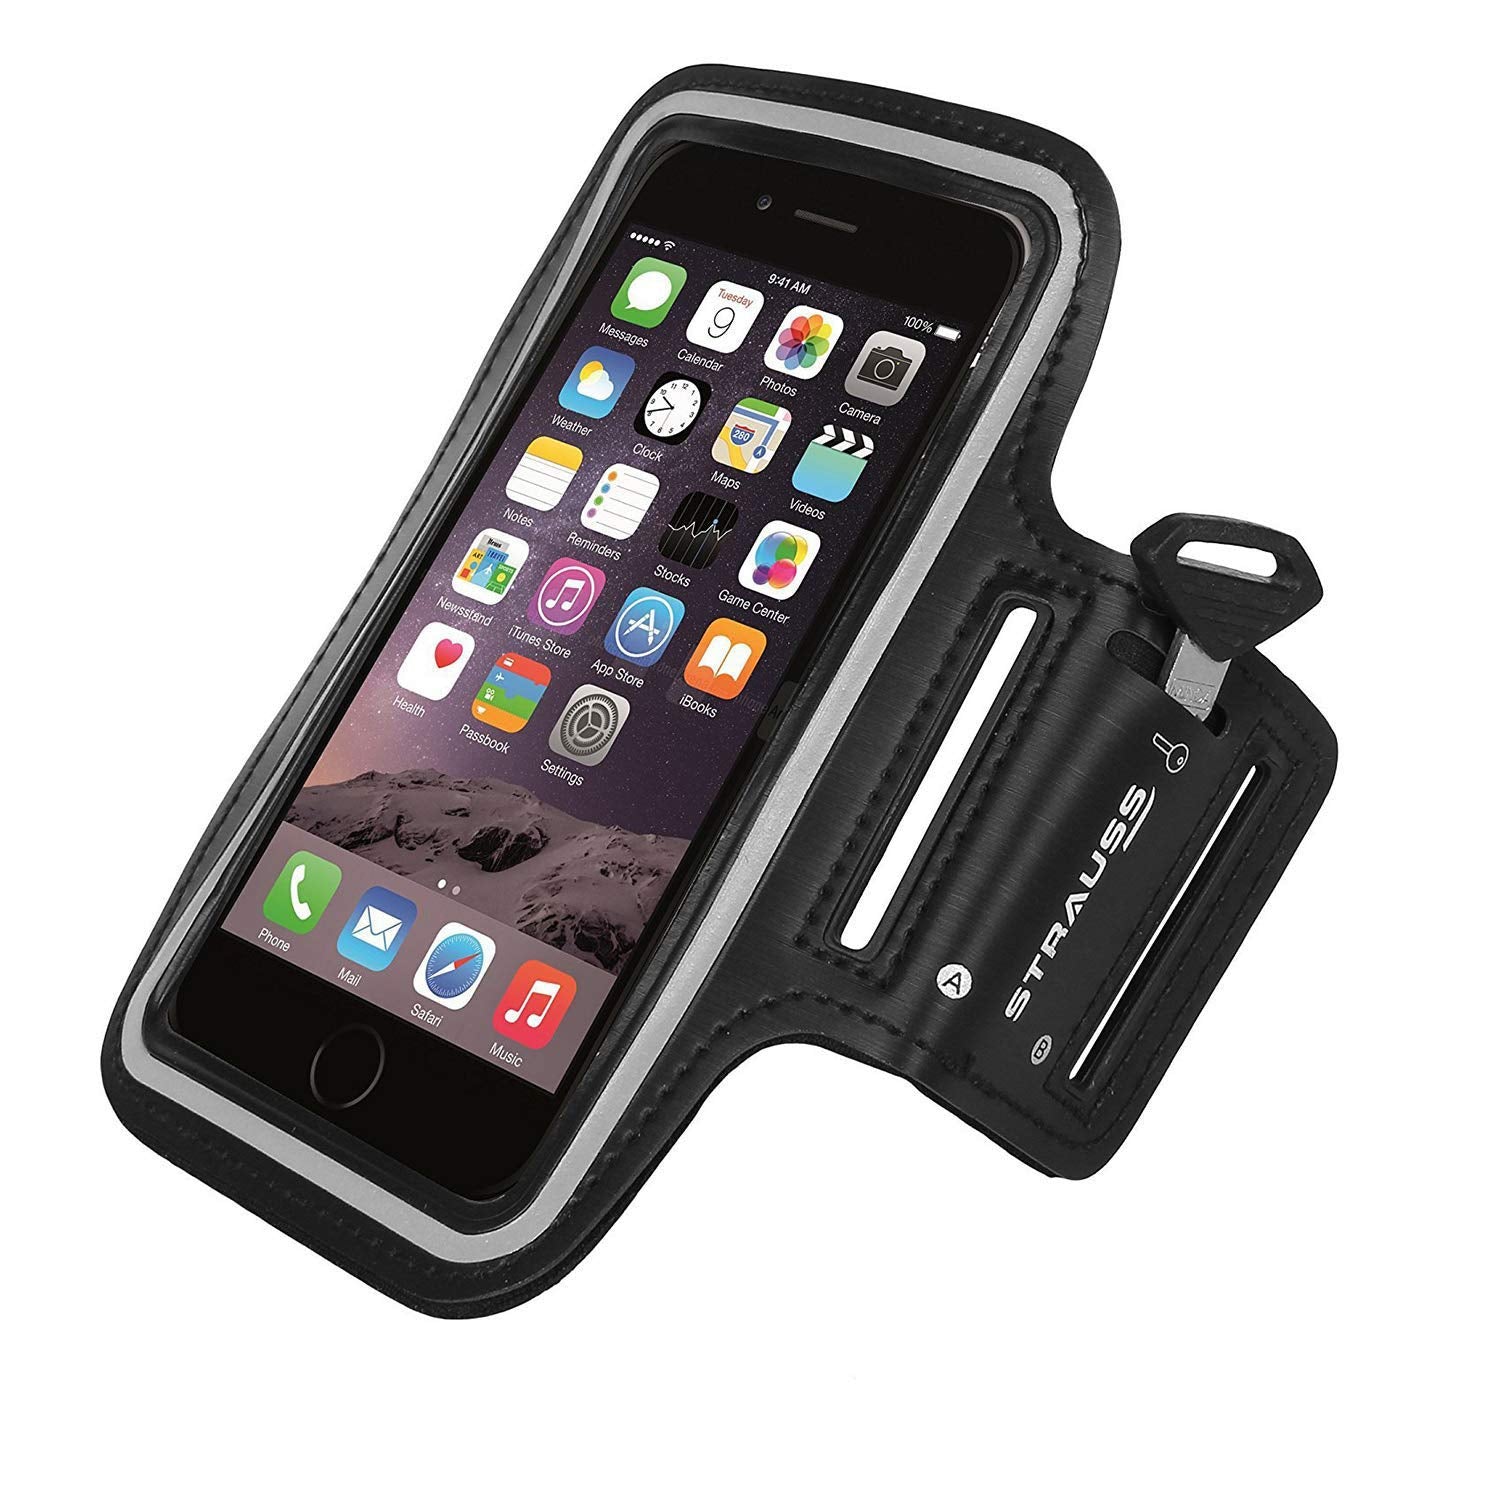 Strauss Sports Mobile Arm Band, (Black)